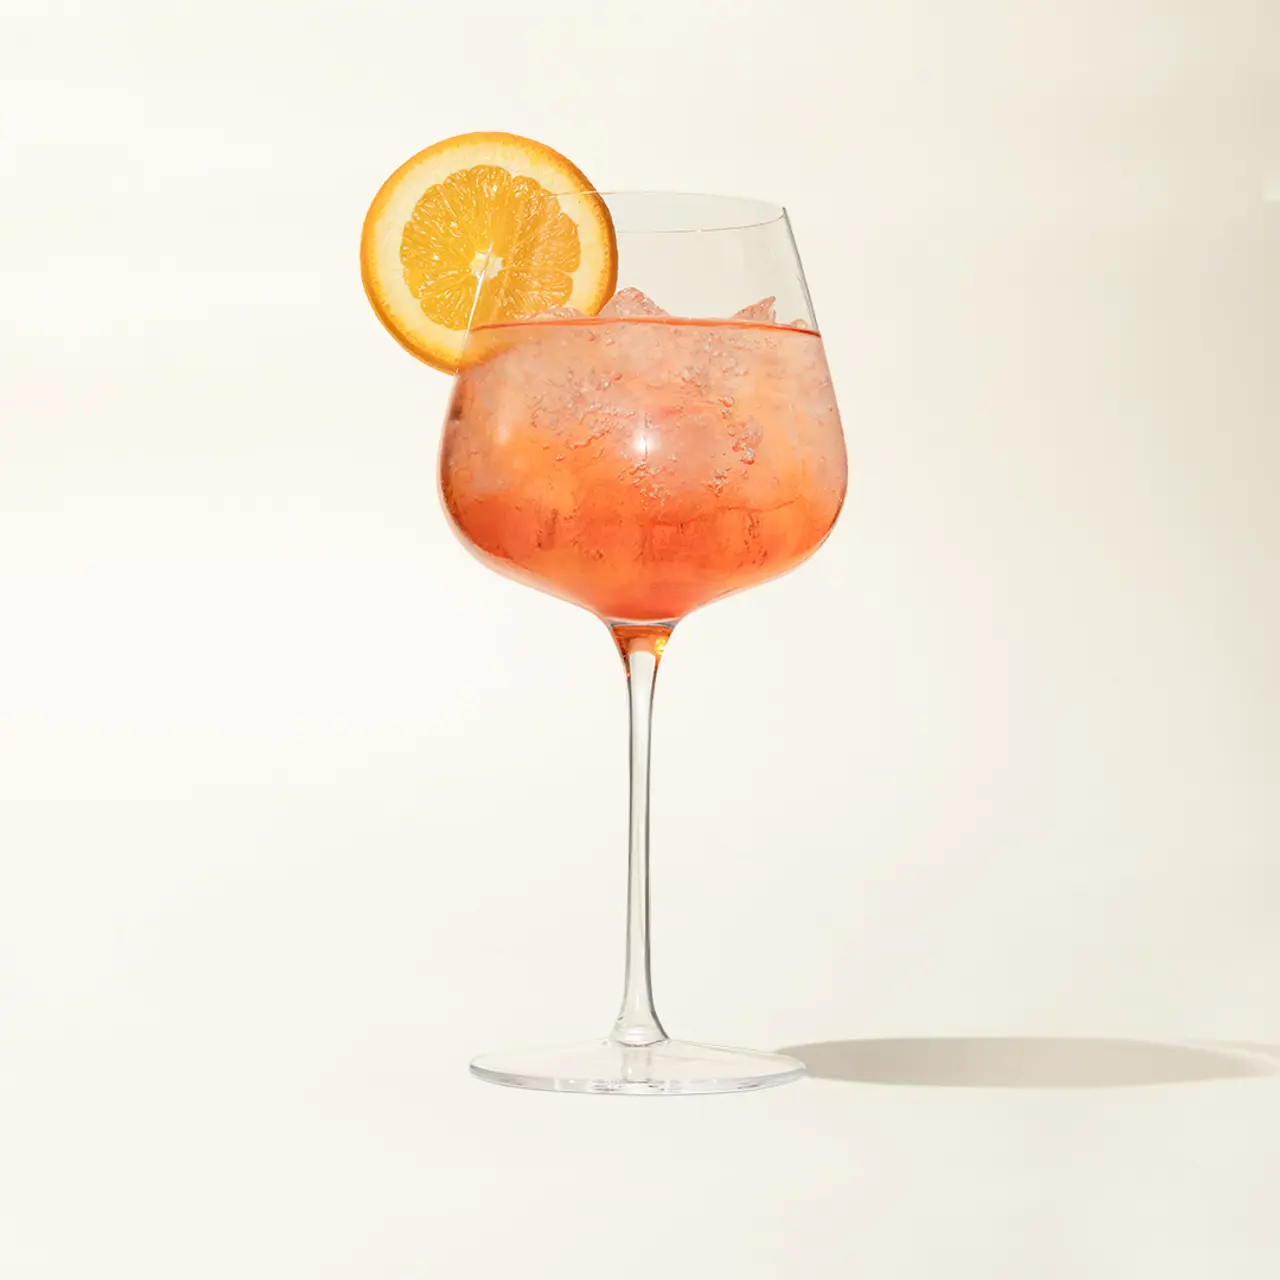 A refreshing cocktail with a slice of orange garnish is presented in a stemmed goblet.